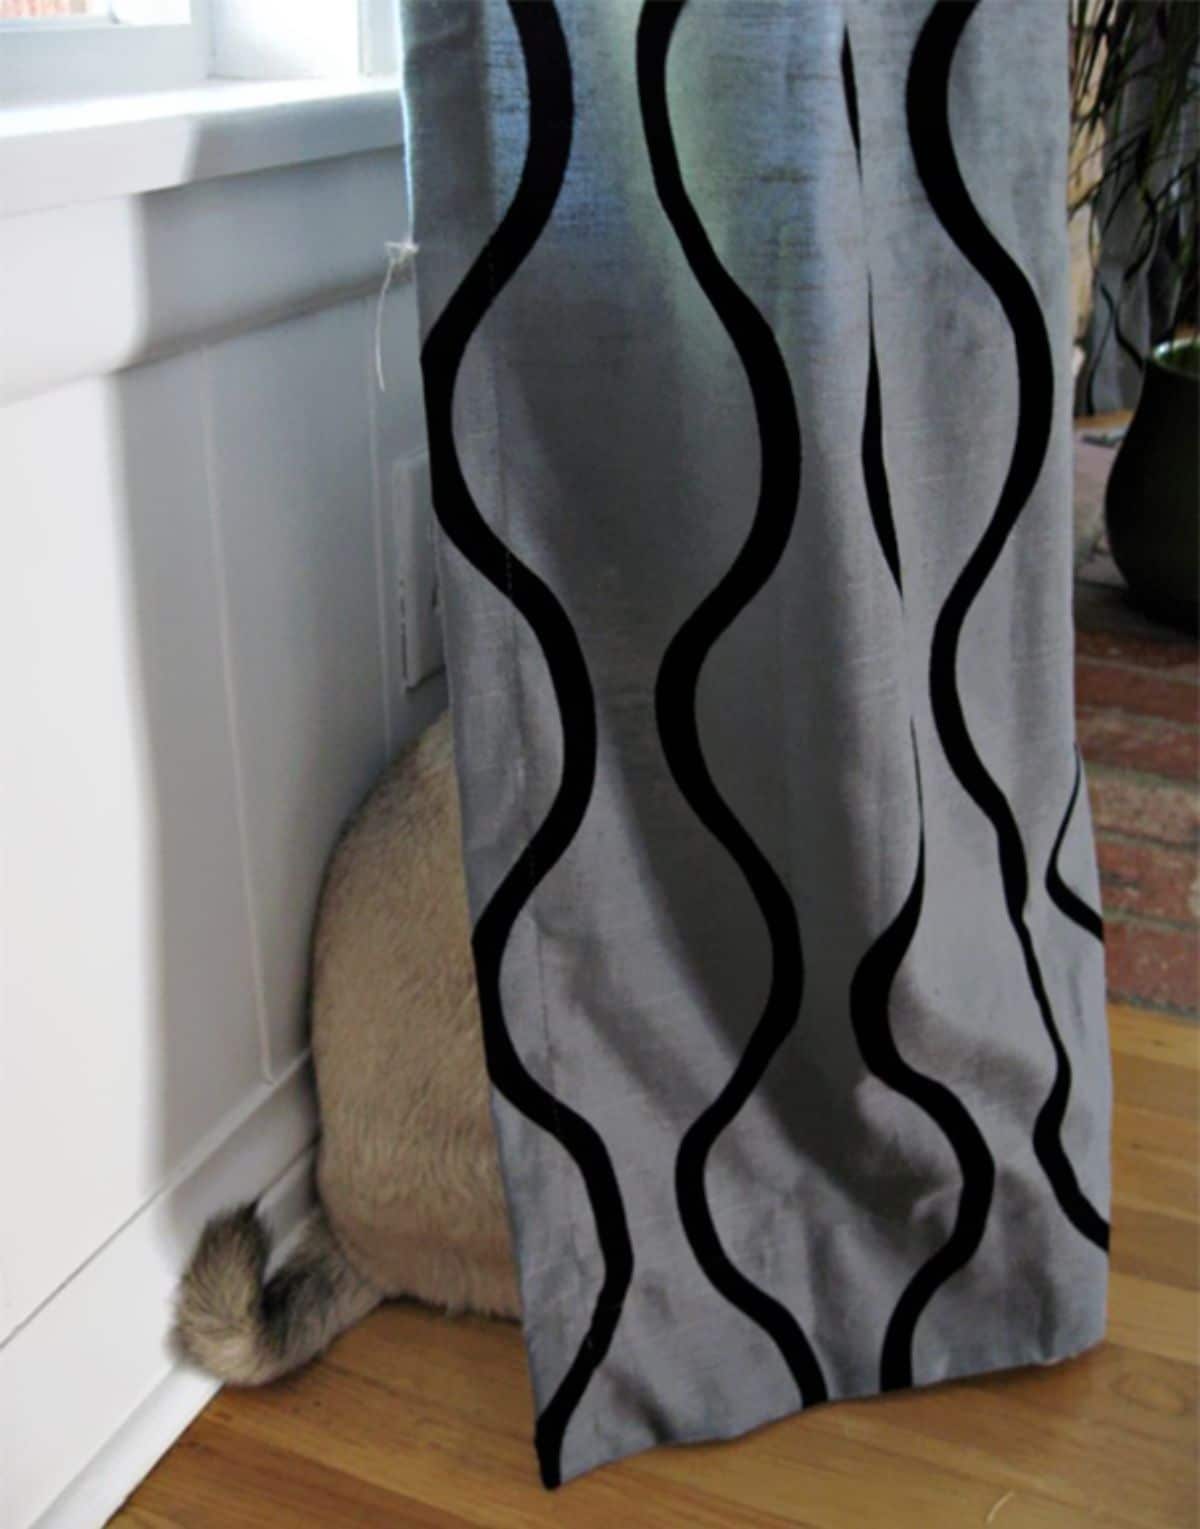 brown and black dog hiding behind a silver and black curtain with the back and the tail showing